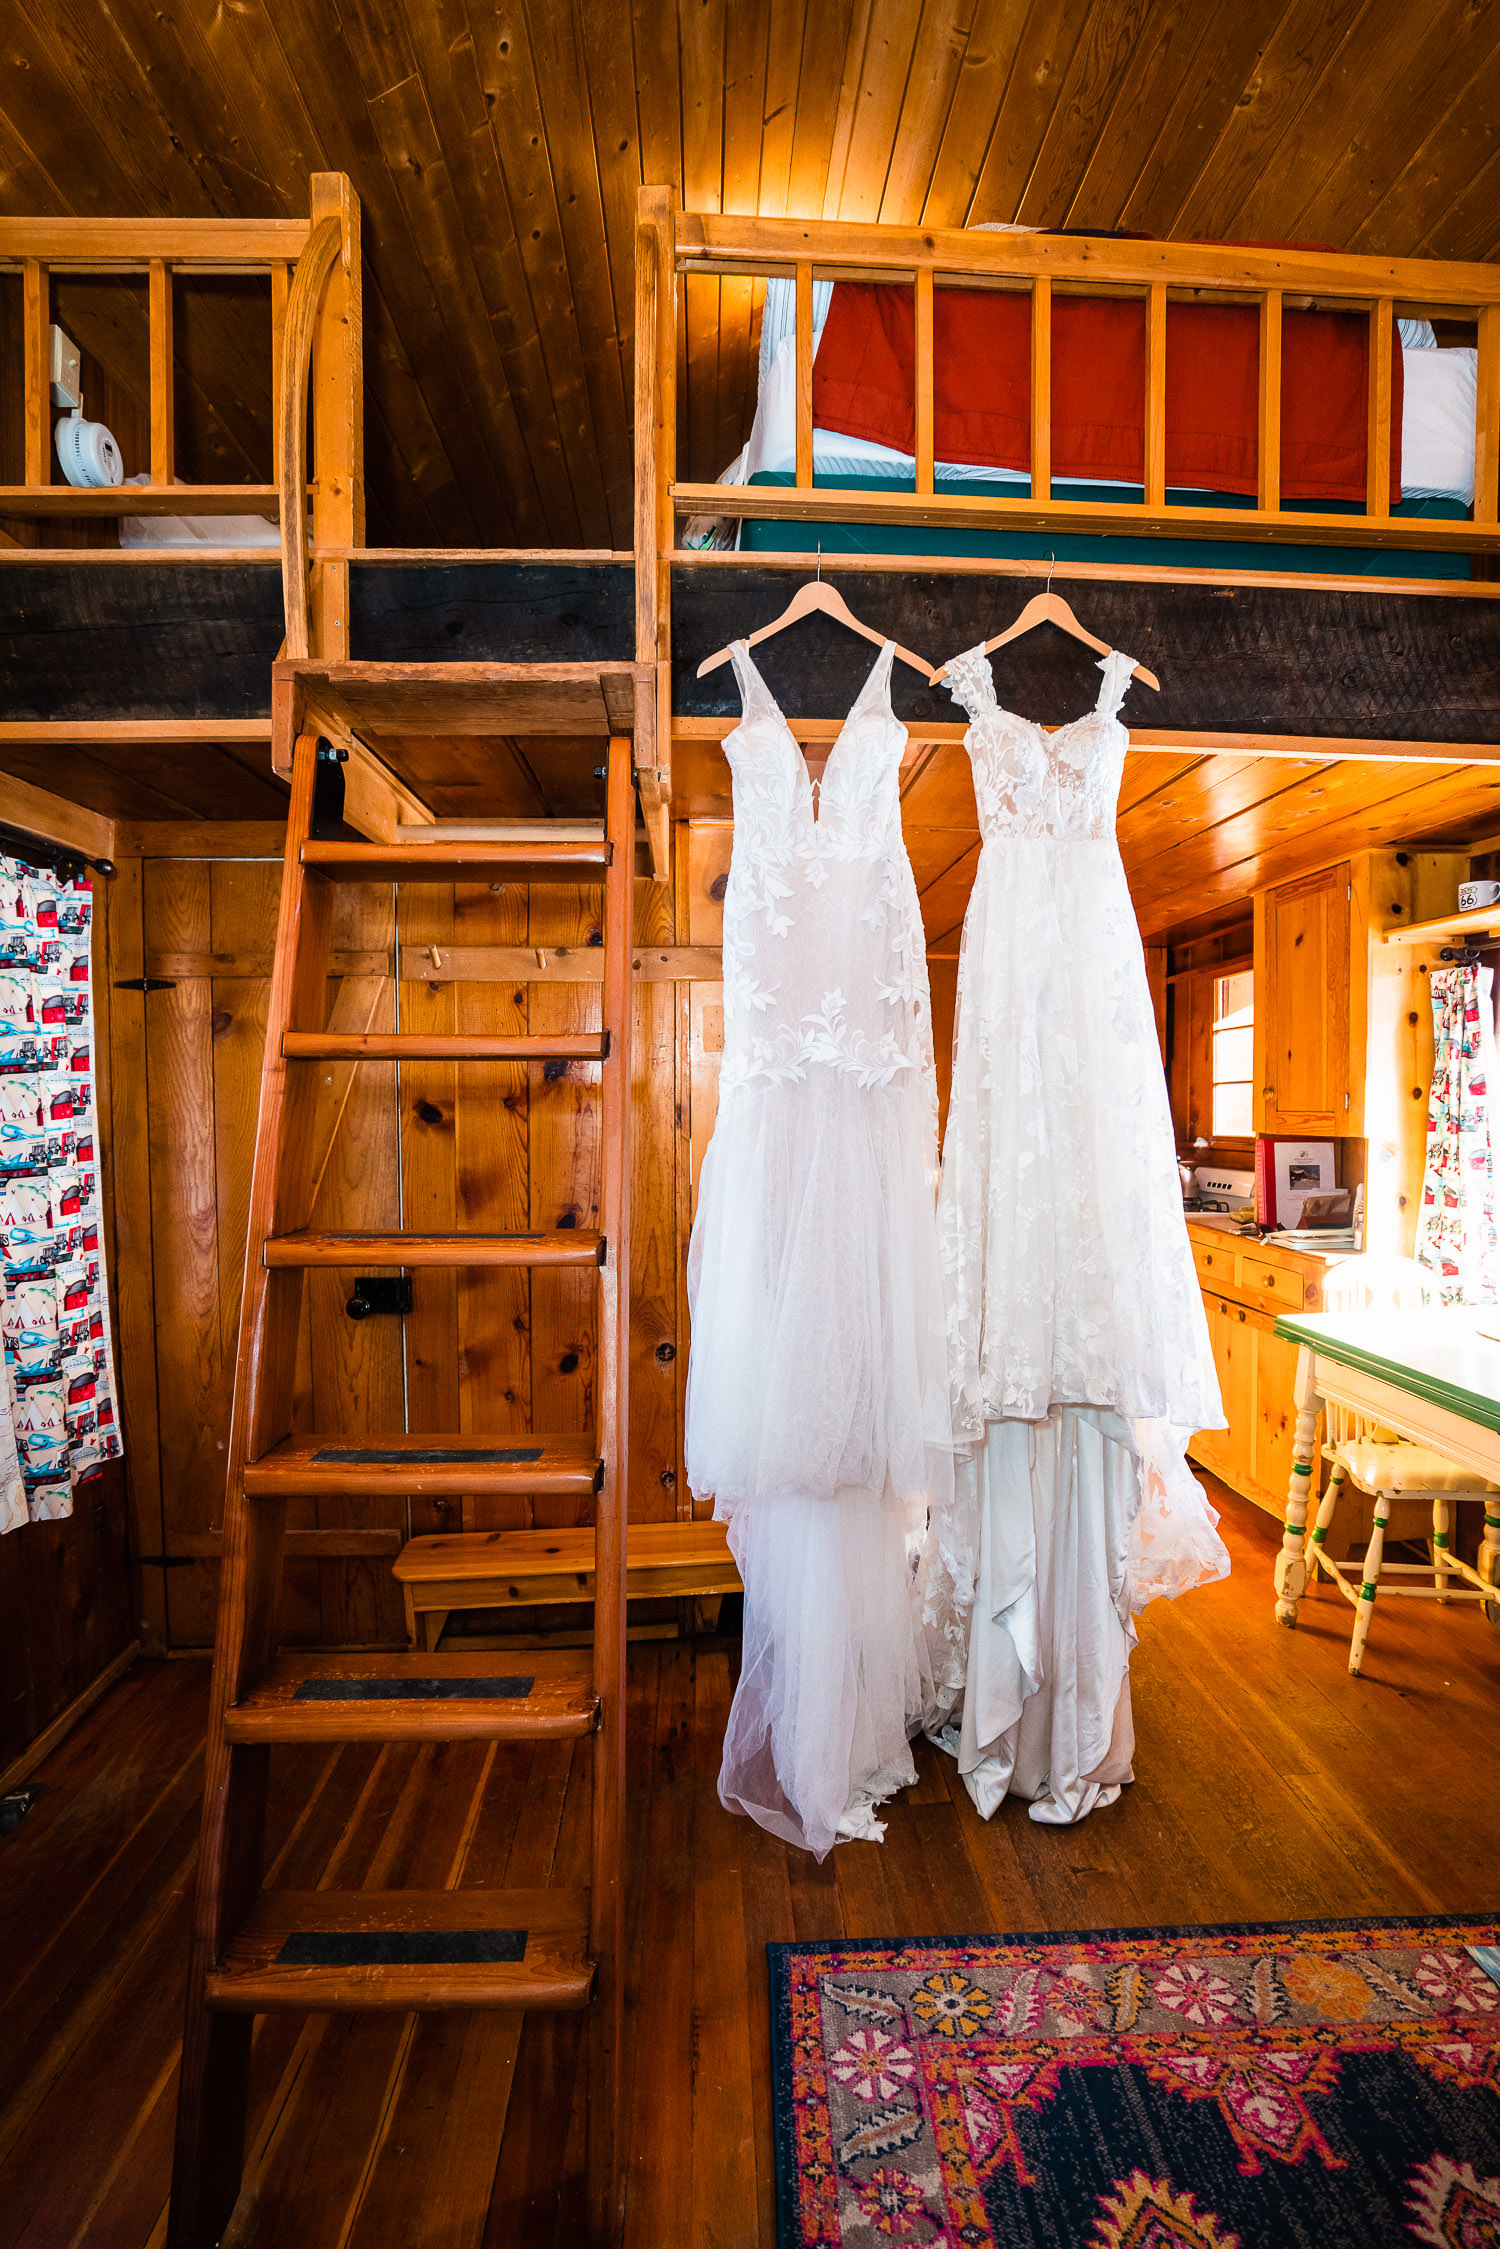 Two wedding dresses hanging side by side in a cozy mountain cabin